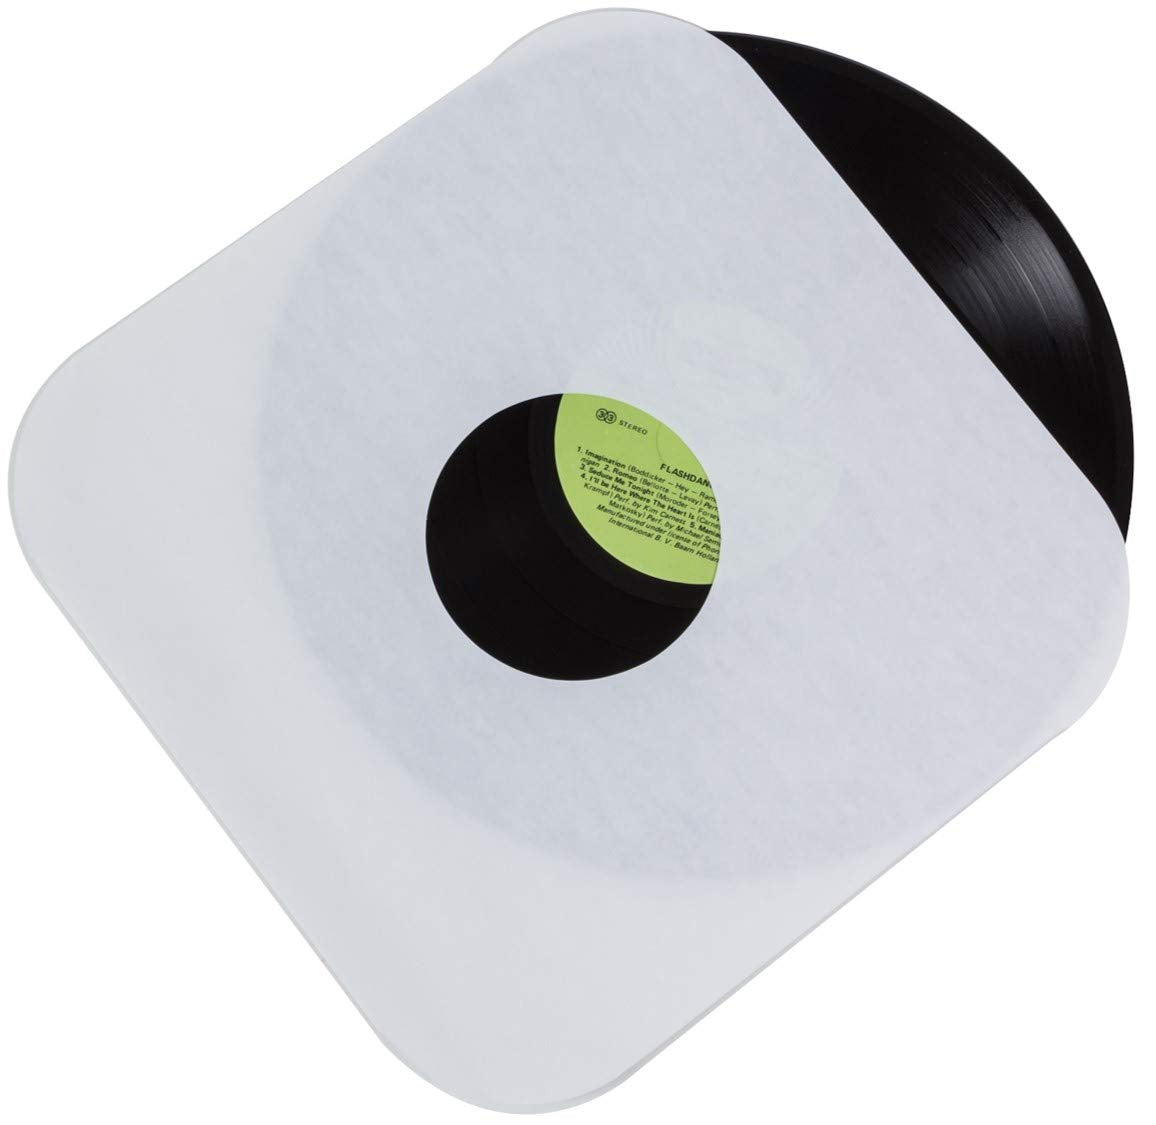 Vinyl Record Inner Paper Sleeves - Premium Acid Free Protection Covers for 12 inch LP Albums - 50 Pack